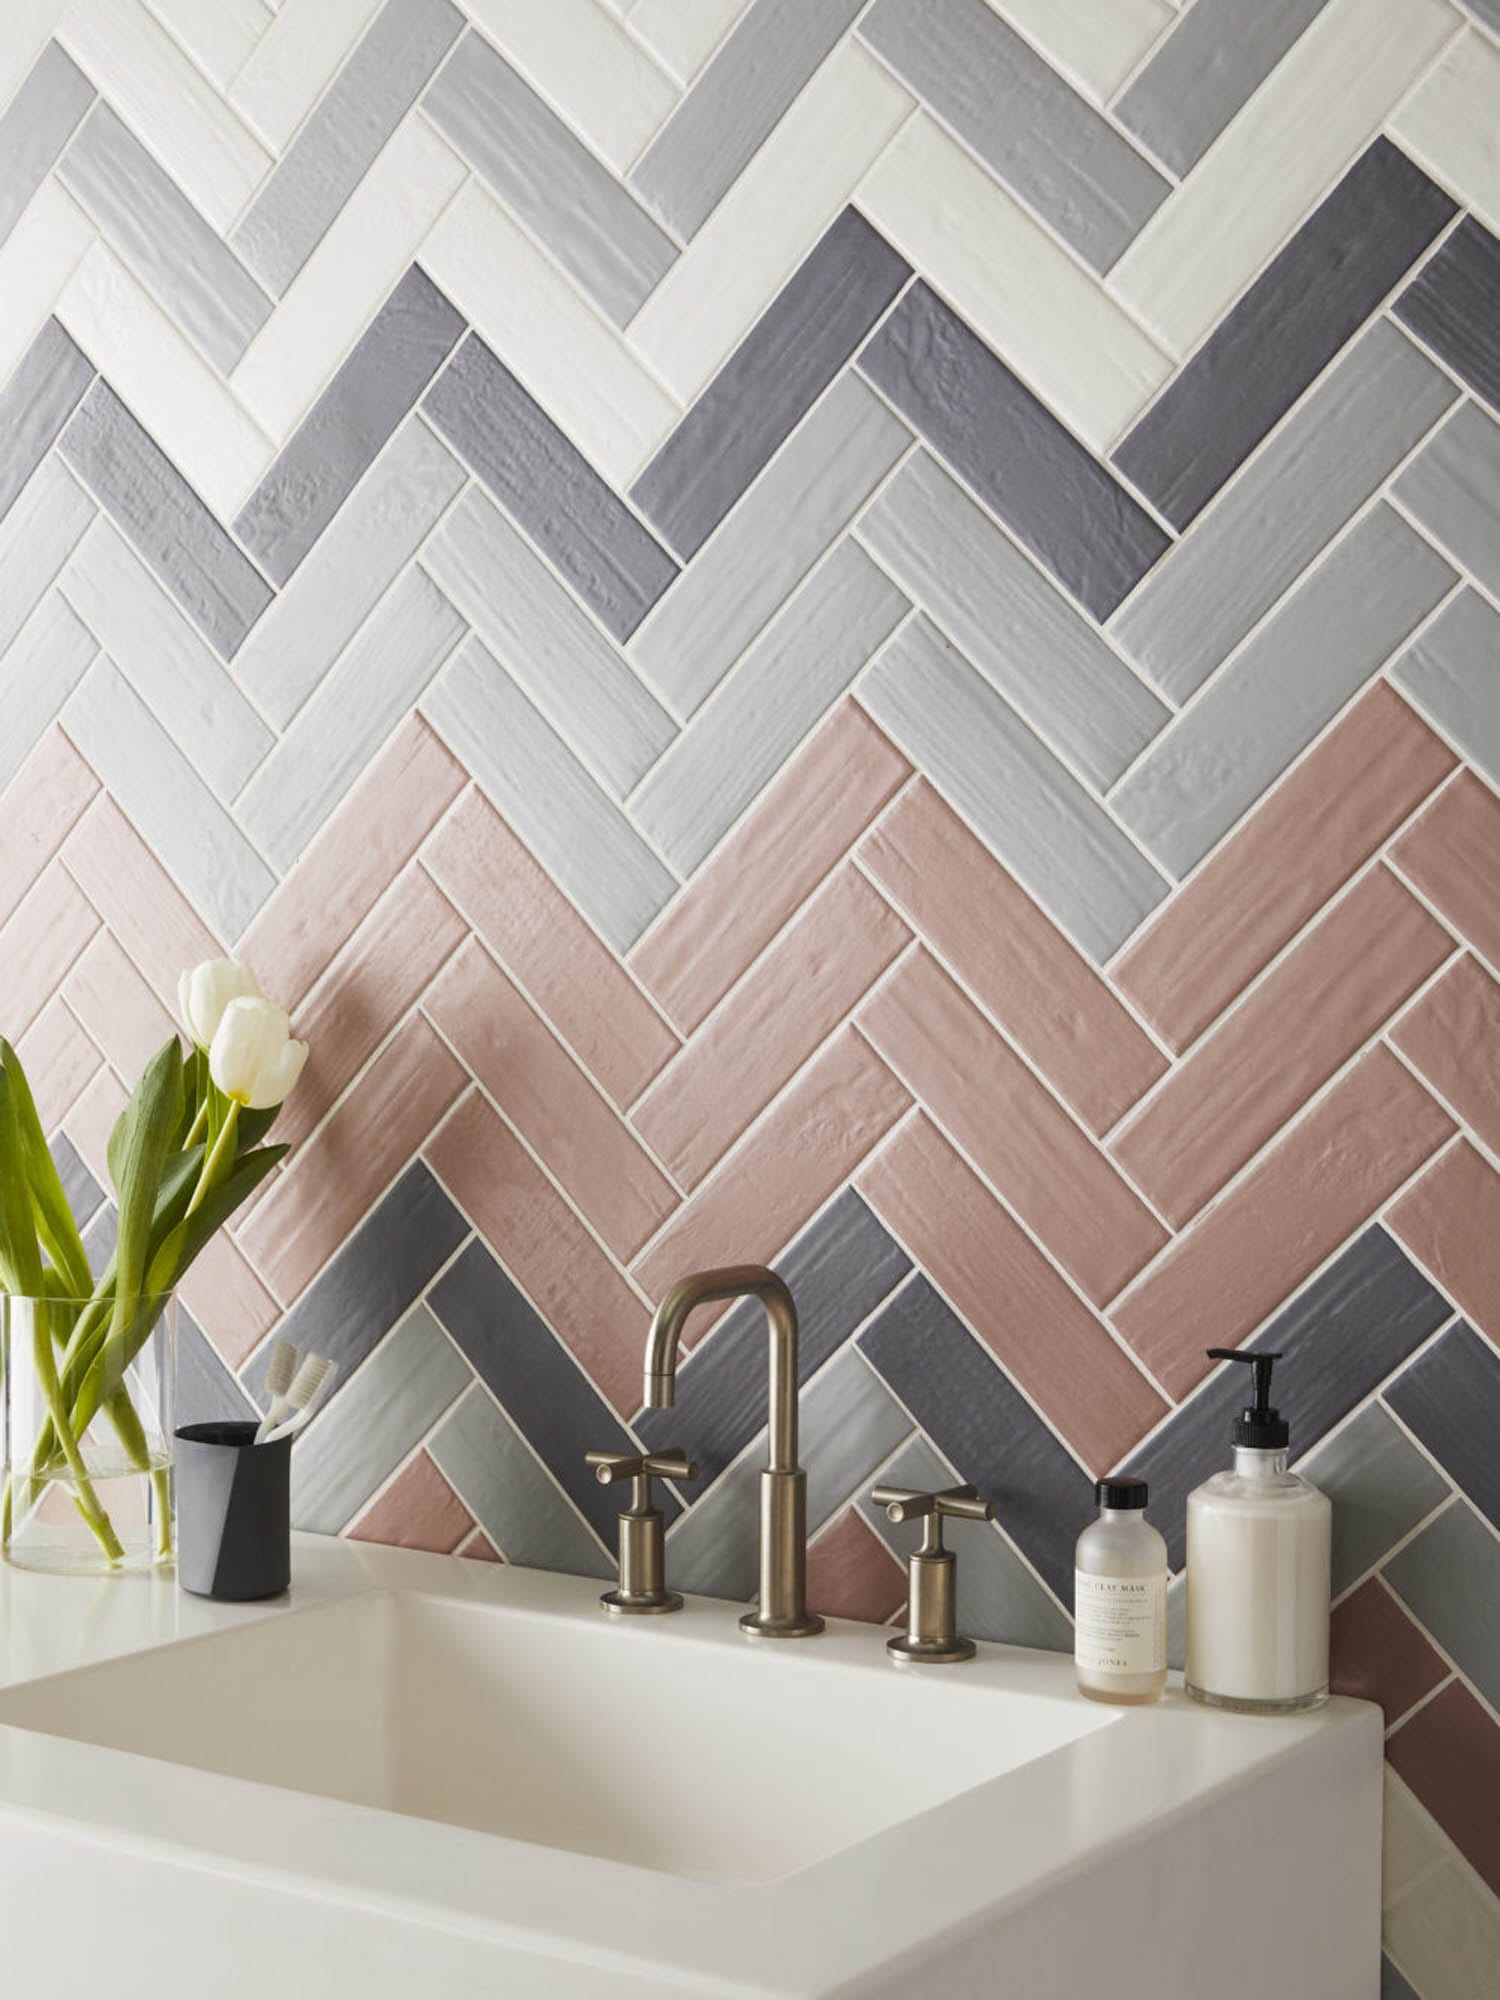 Tile Patterns And Layouts The Tile Shop Blog